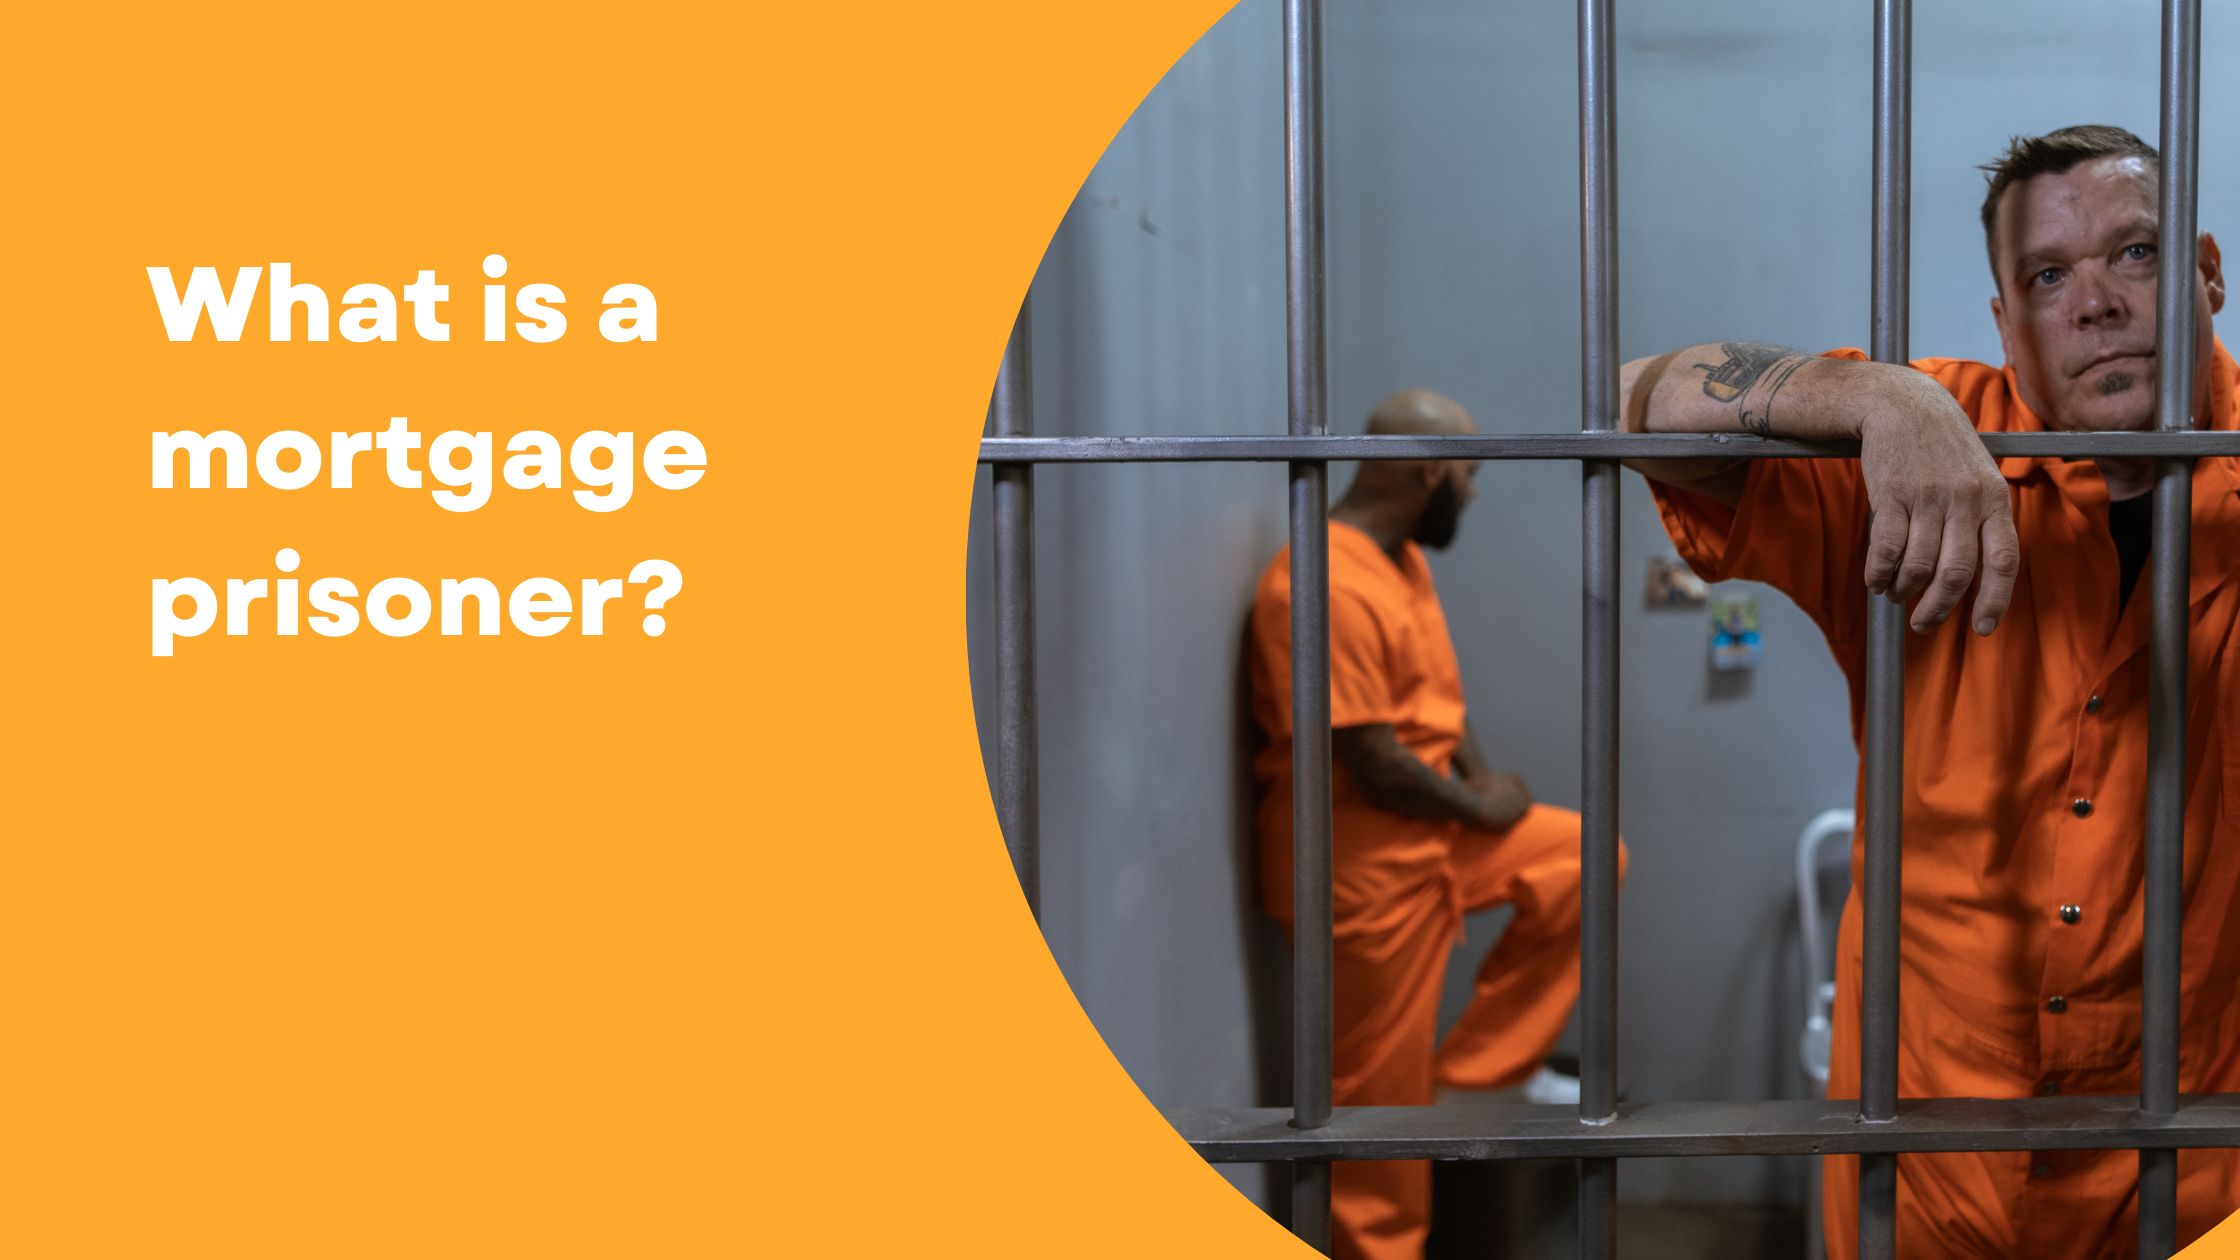 What is a Mortgage prisoner